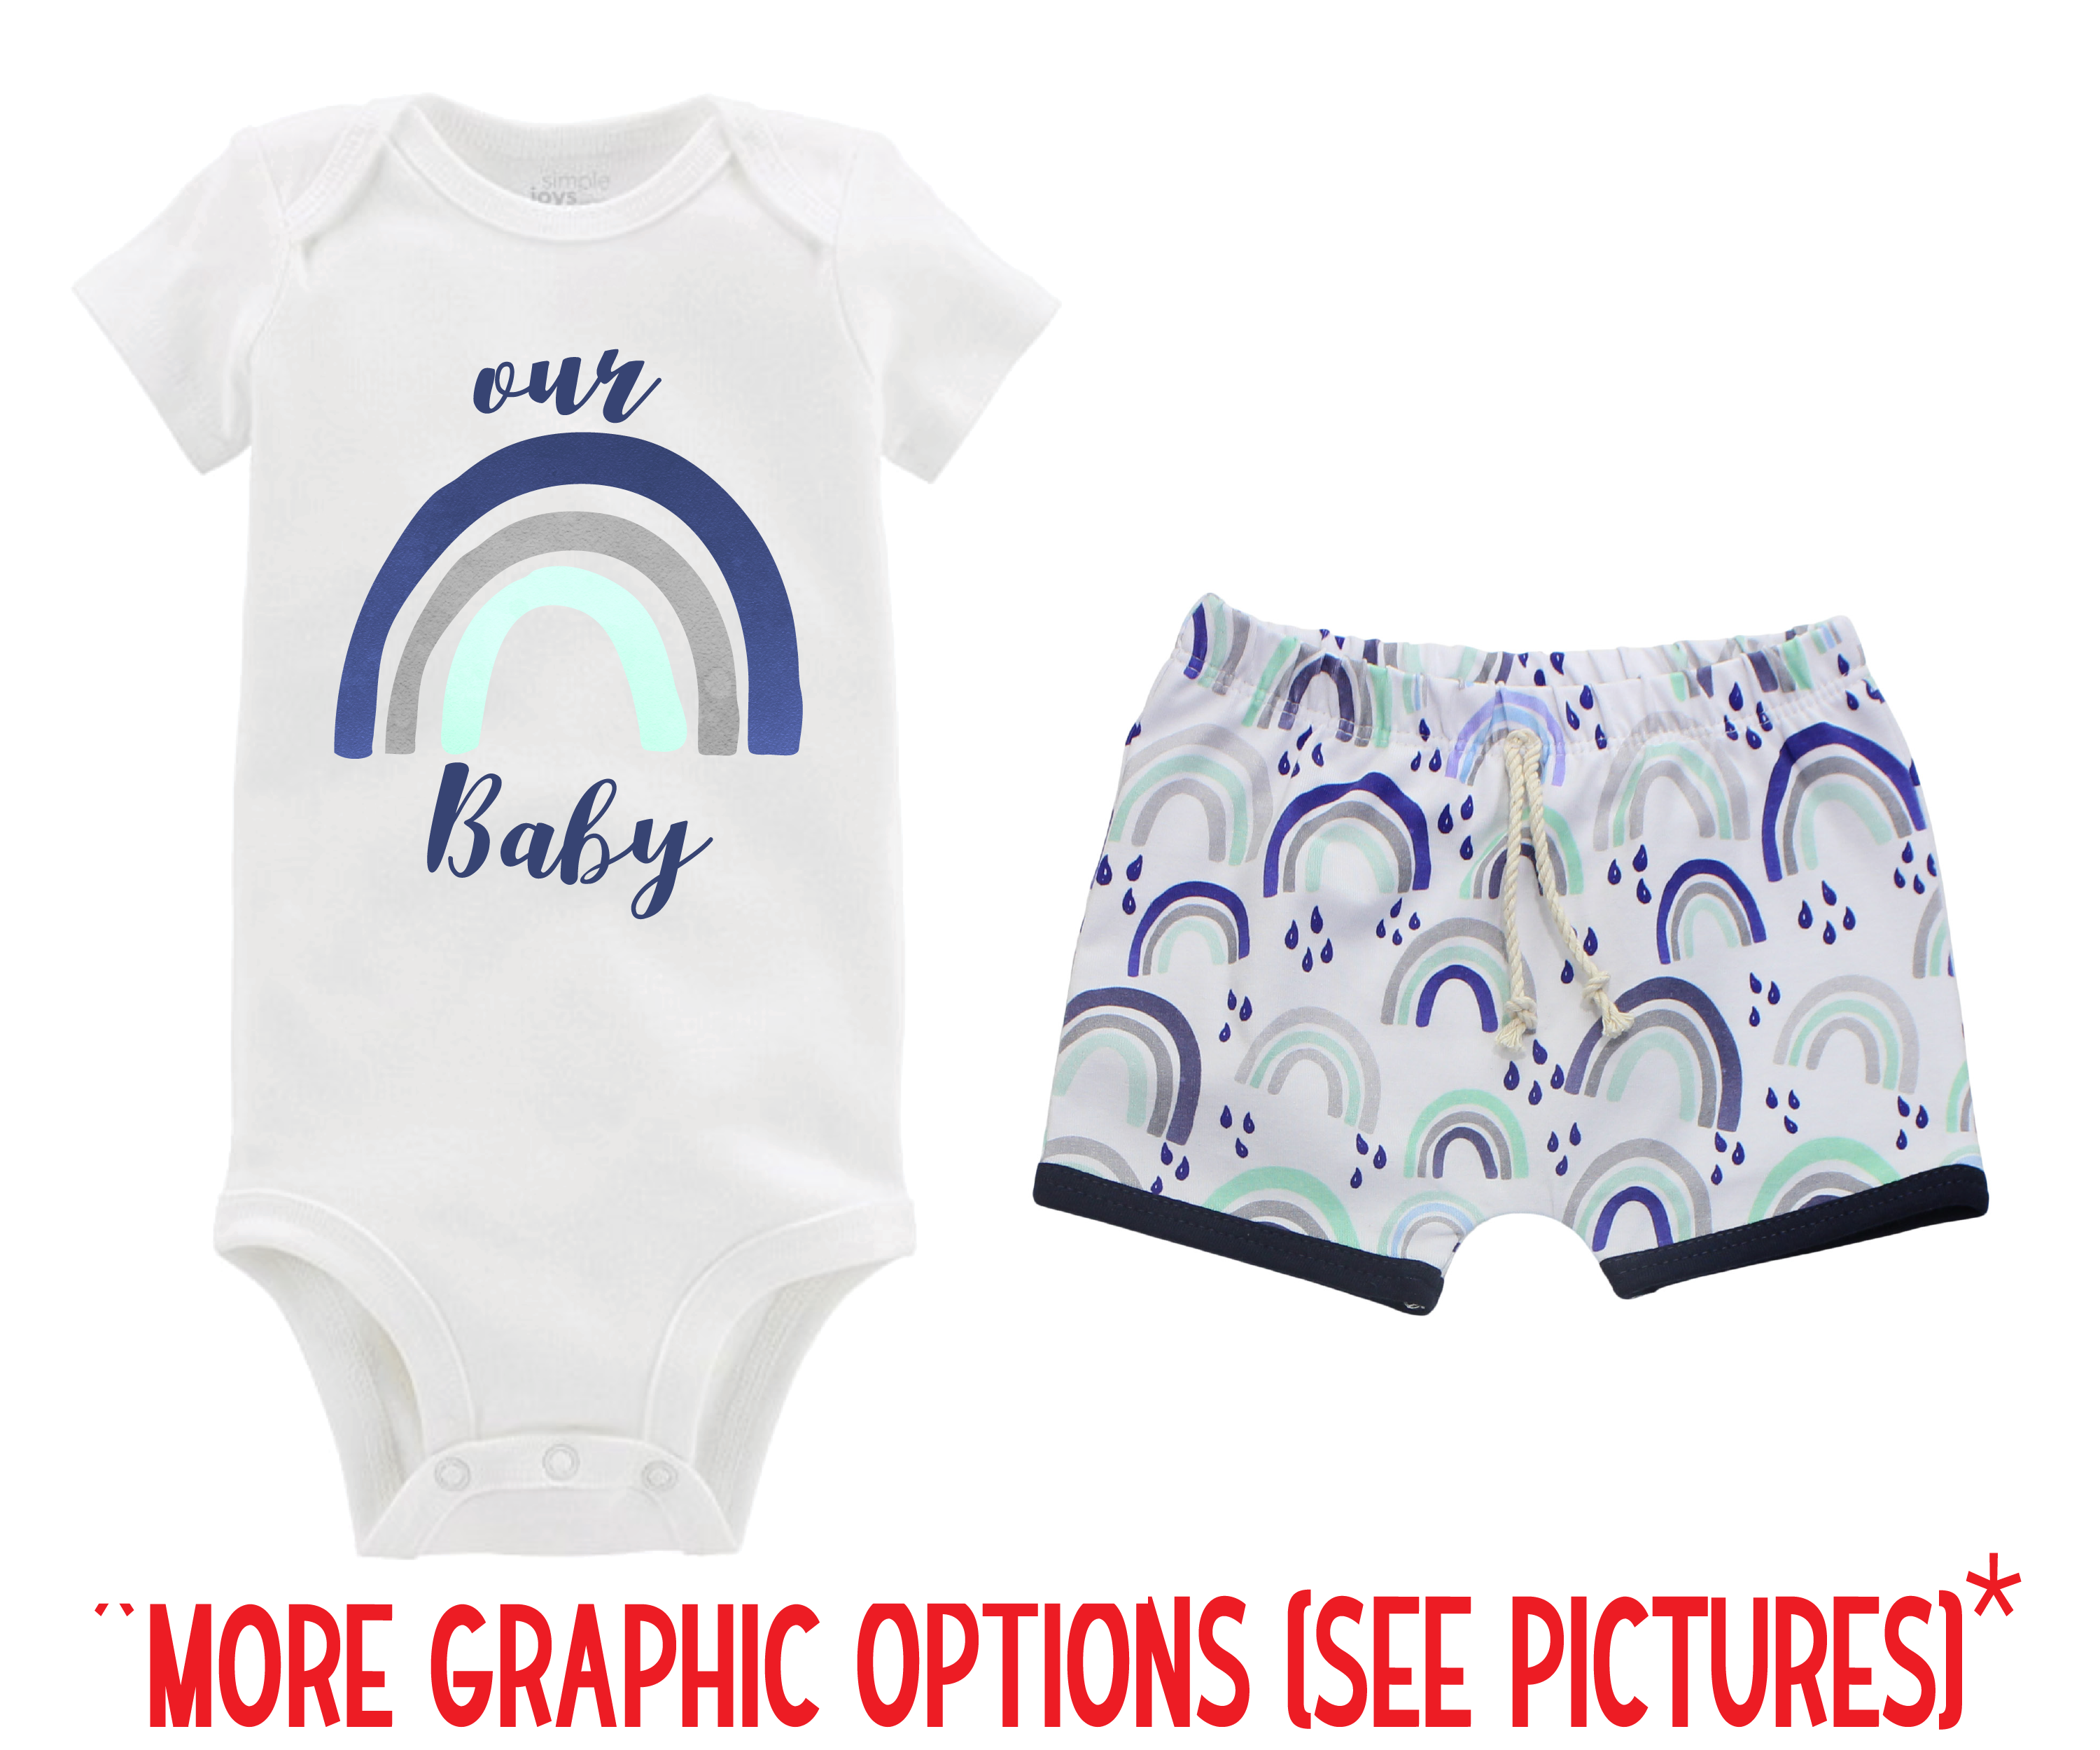 Boy Rainbow Baby Short Outfit